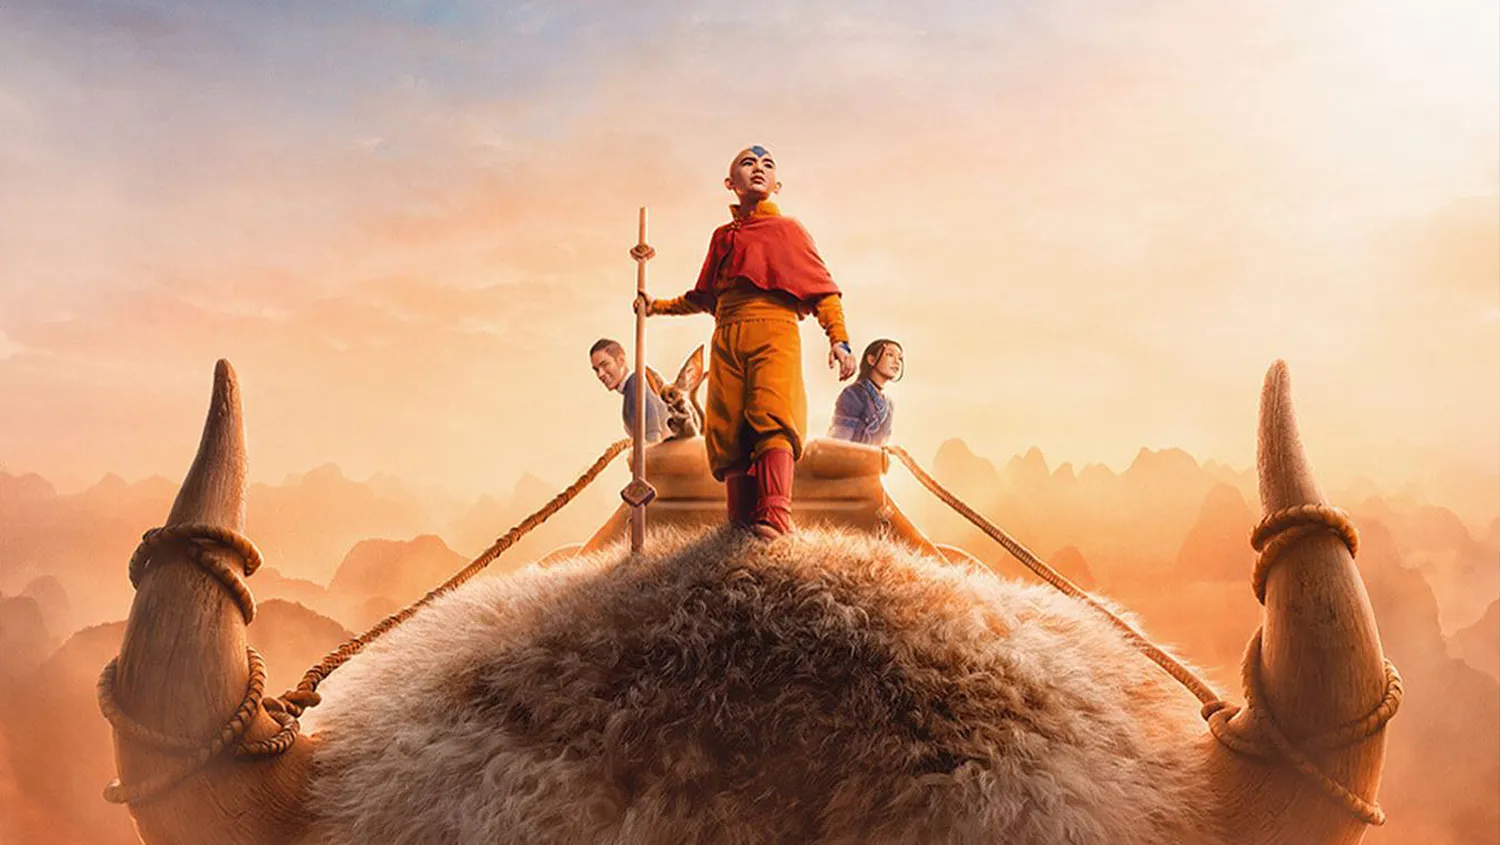 Netflix's Live-Action Adaptation of Avatar: The Last Airbender - What We Know So Far